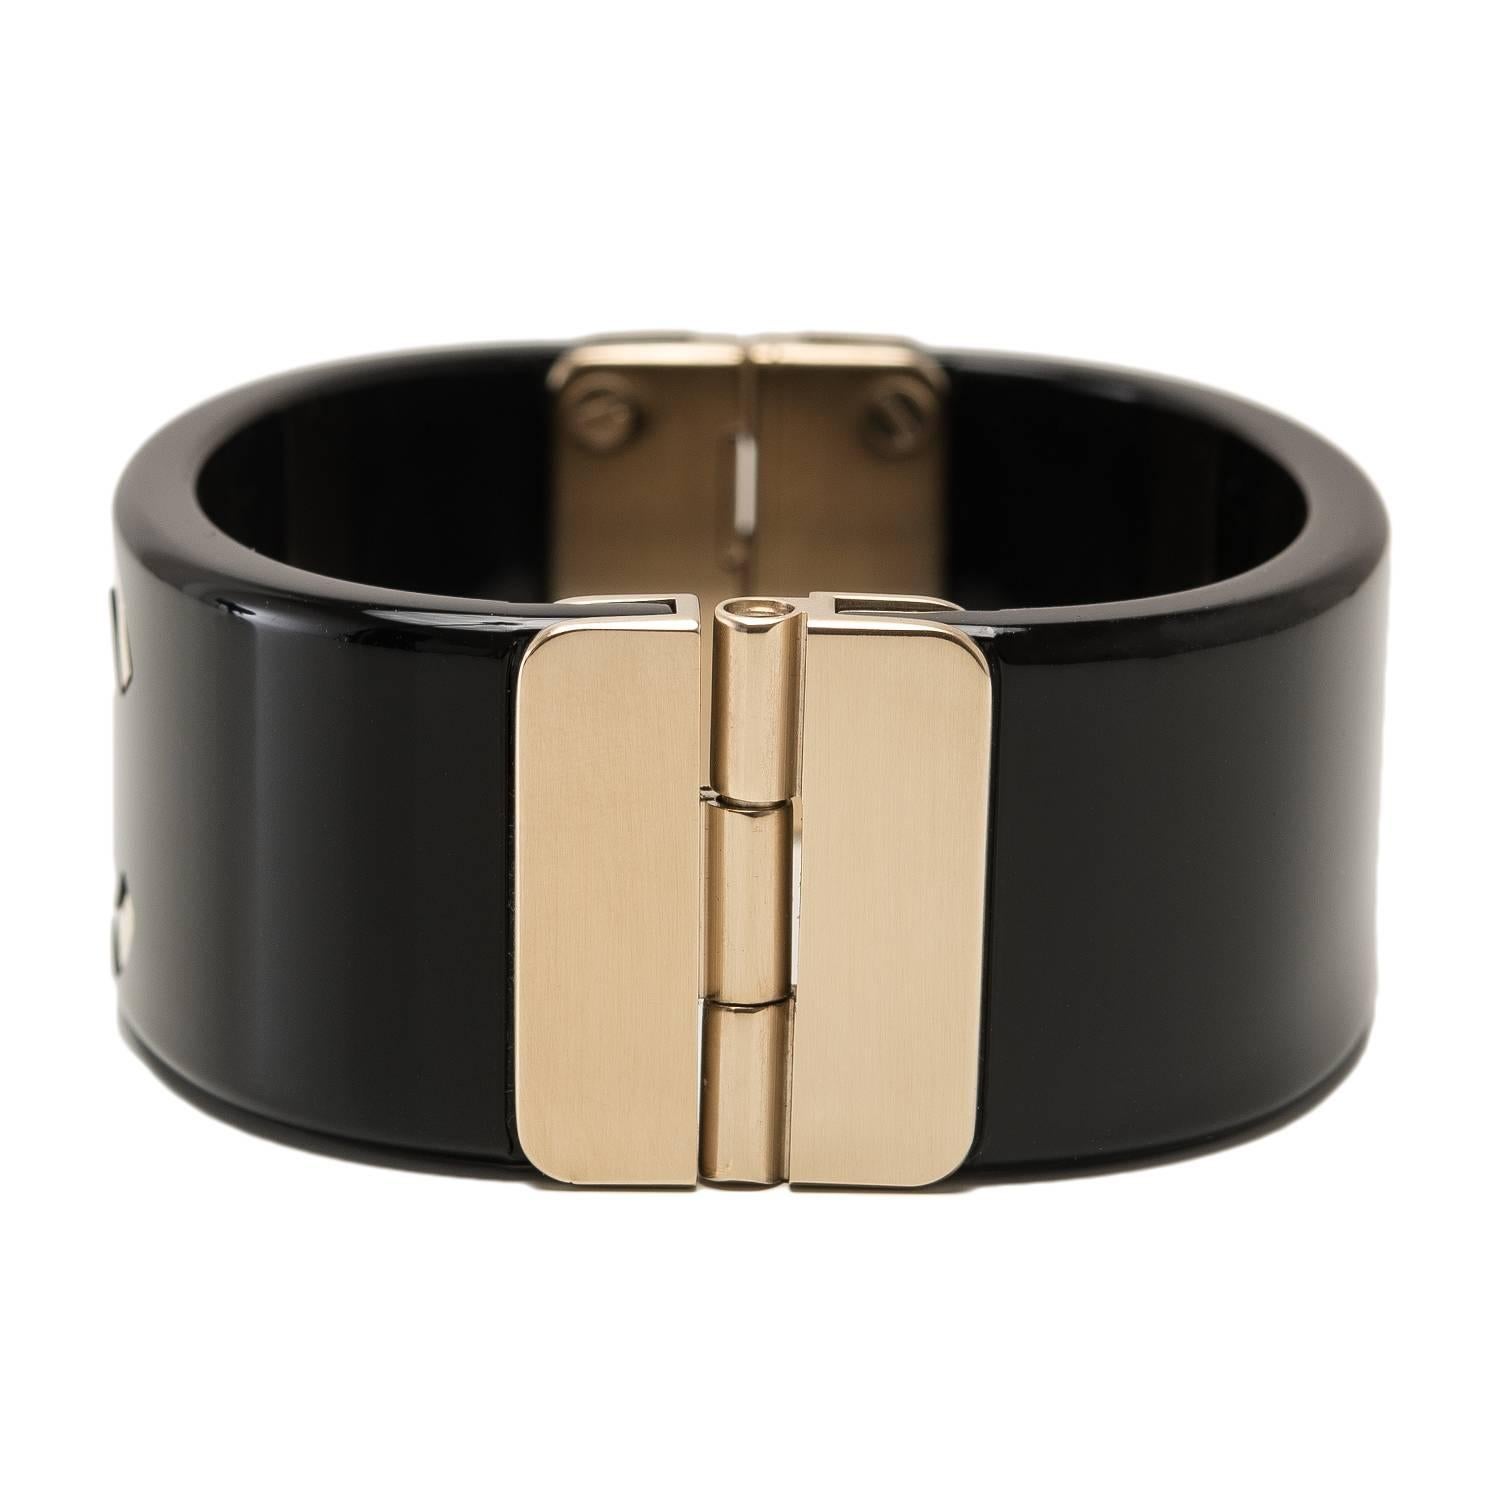 Chanel wide CC logo cuff bracelet of black resin and matte gold tone metal.

This limited edition bracelet, part of the Spring 2016 collection, has a CC-logo in front, a matte gold tone hinge closure in back and matte push button